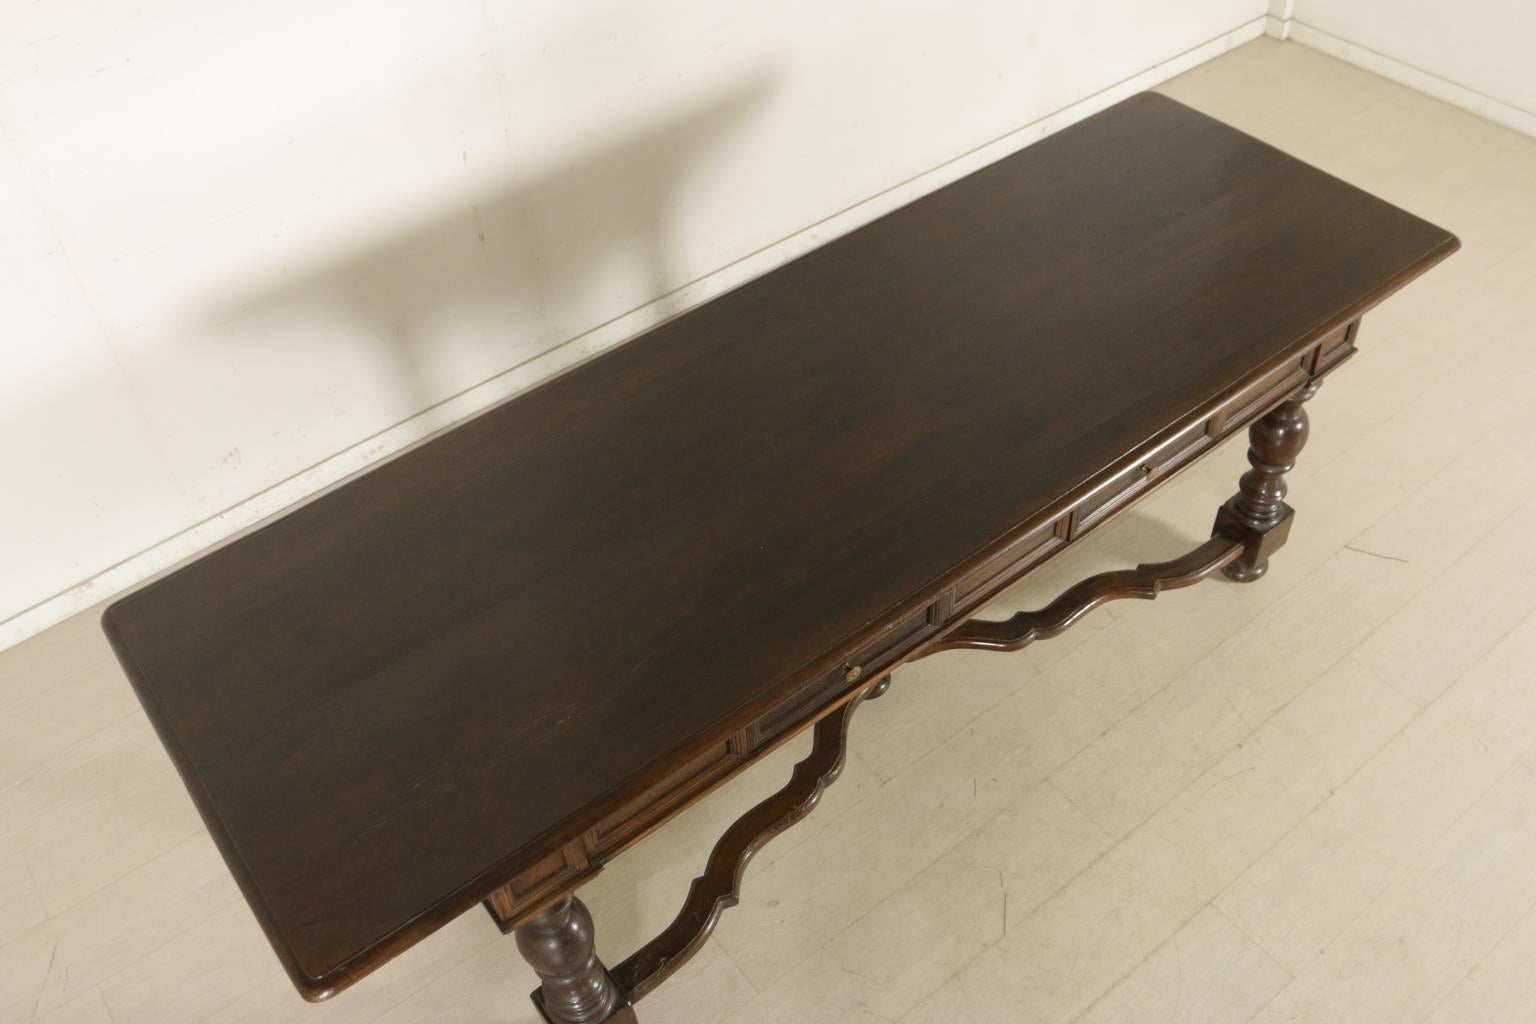 A large walnut table with turned legs jointed by shaped and turned cross stretchers. A pair of drawers on the band. Solid walnut top. Manufactured in Italy, first half of the 20th century.